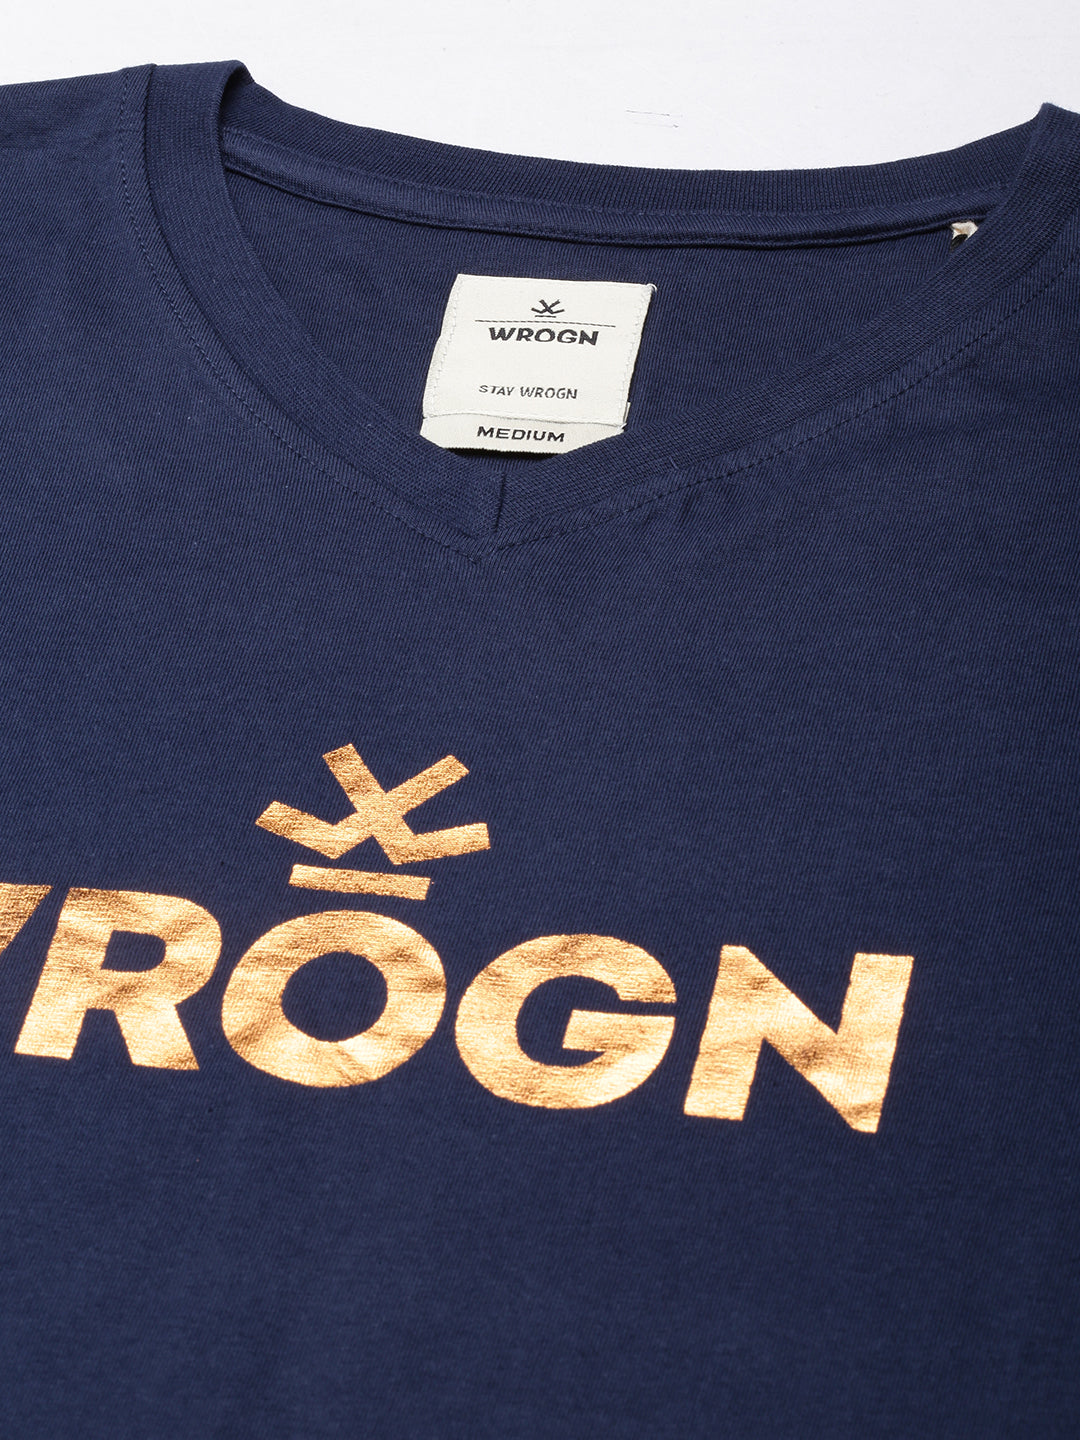 Graphic Wrogn Lux T-shirt